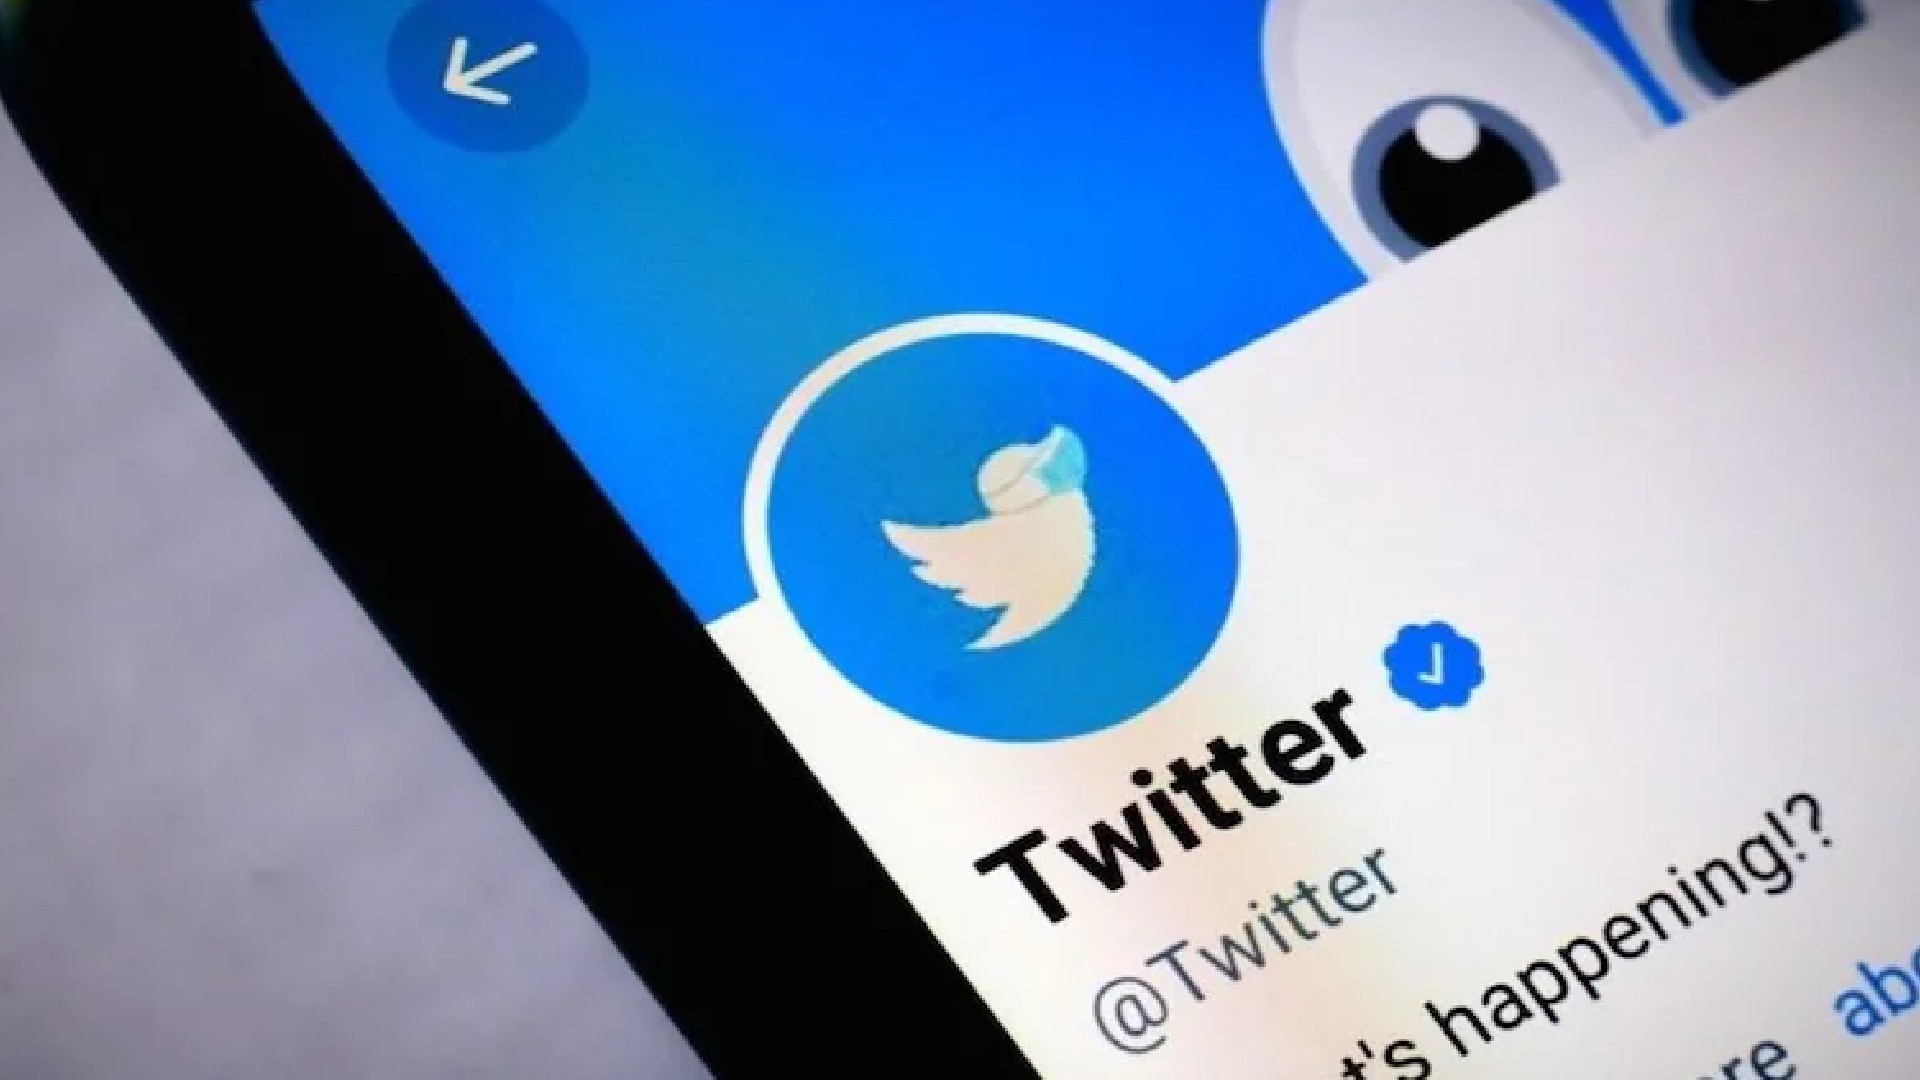 Twitter Introduces ‘Articles’: Users Can Now Share Long-Form Content